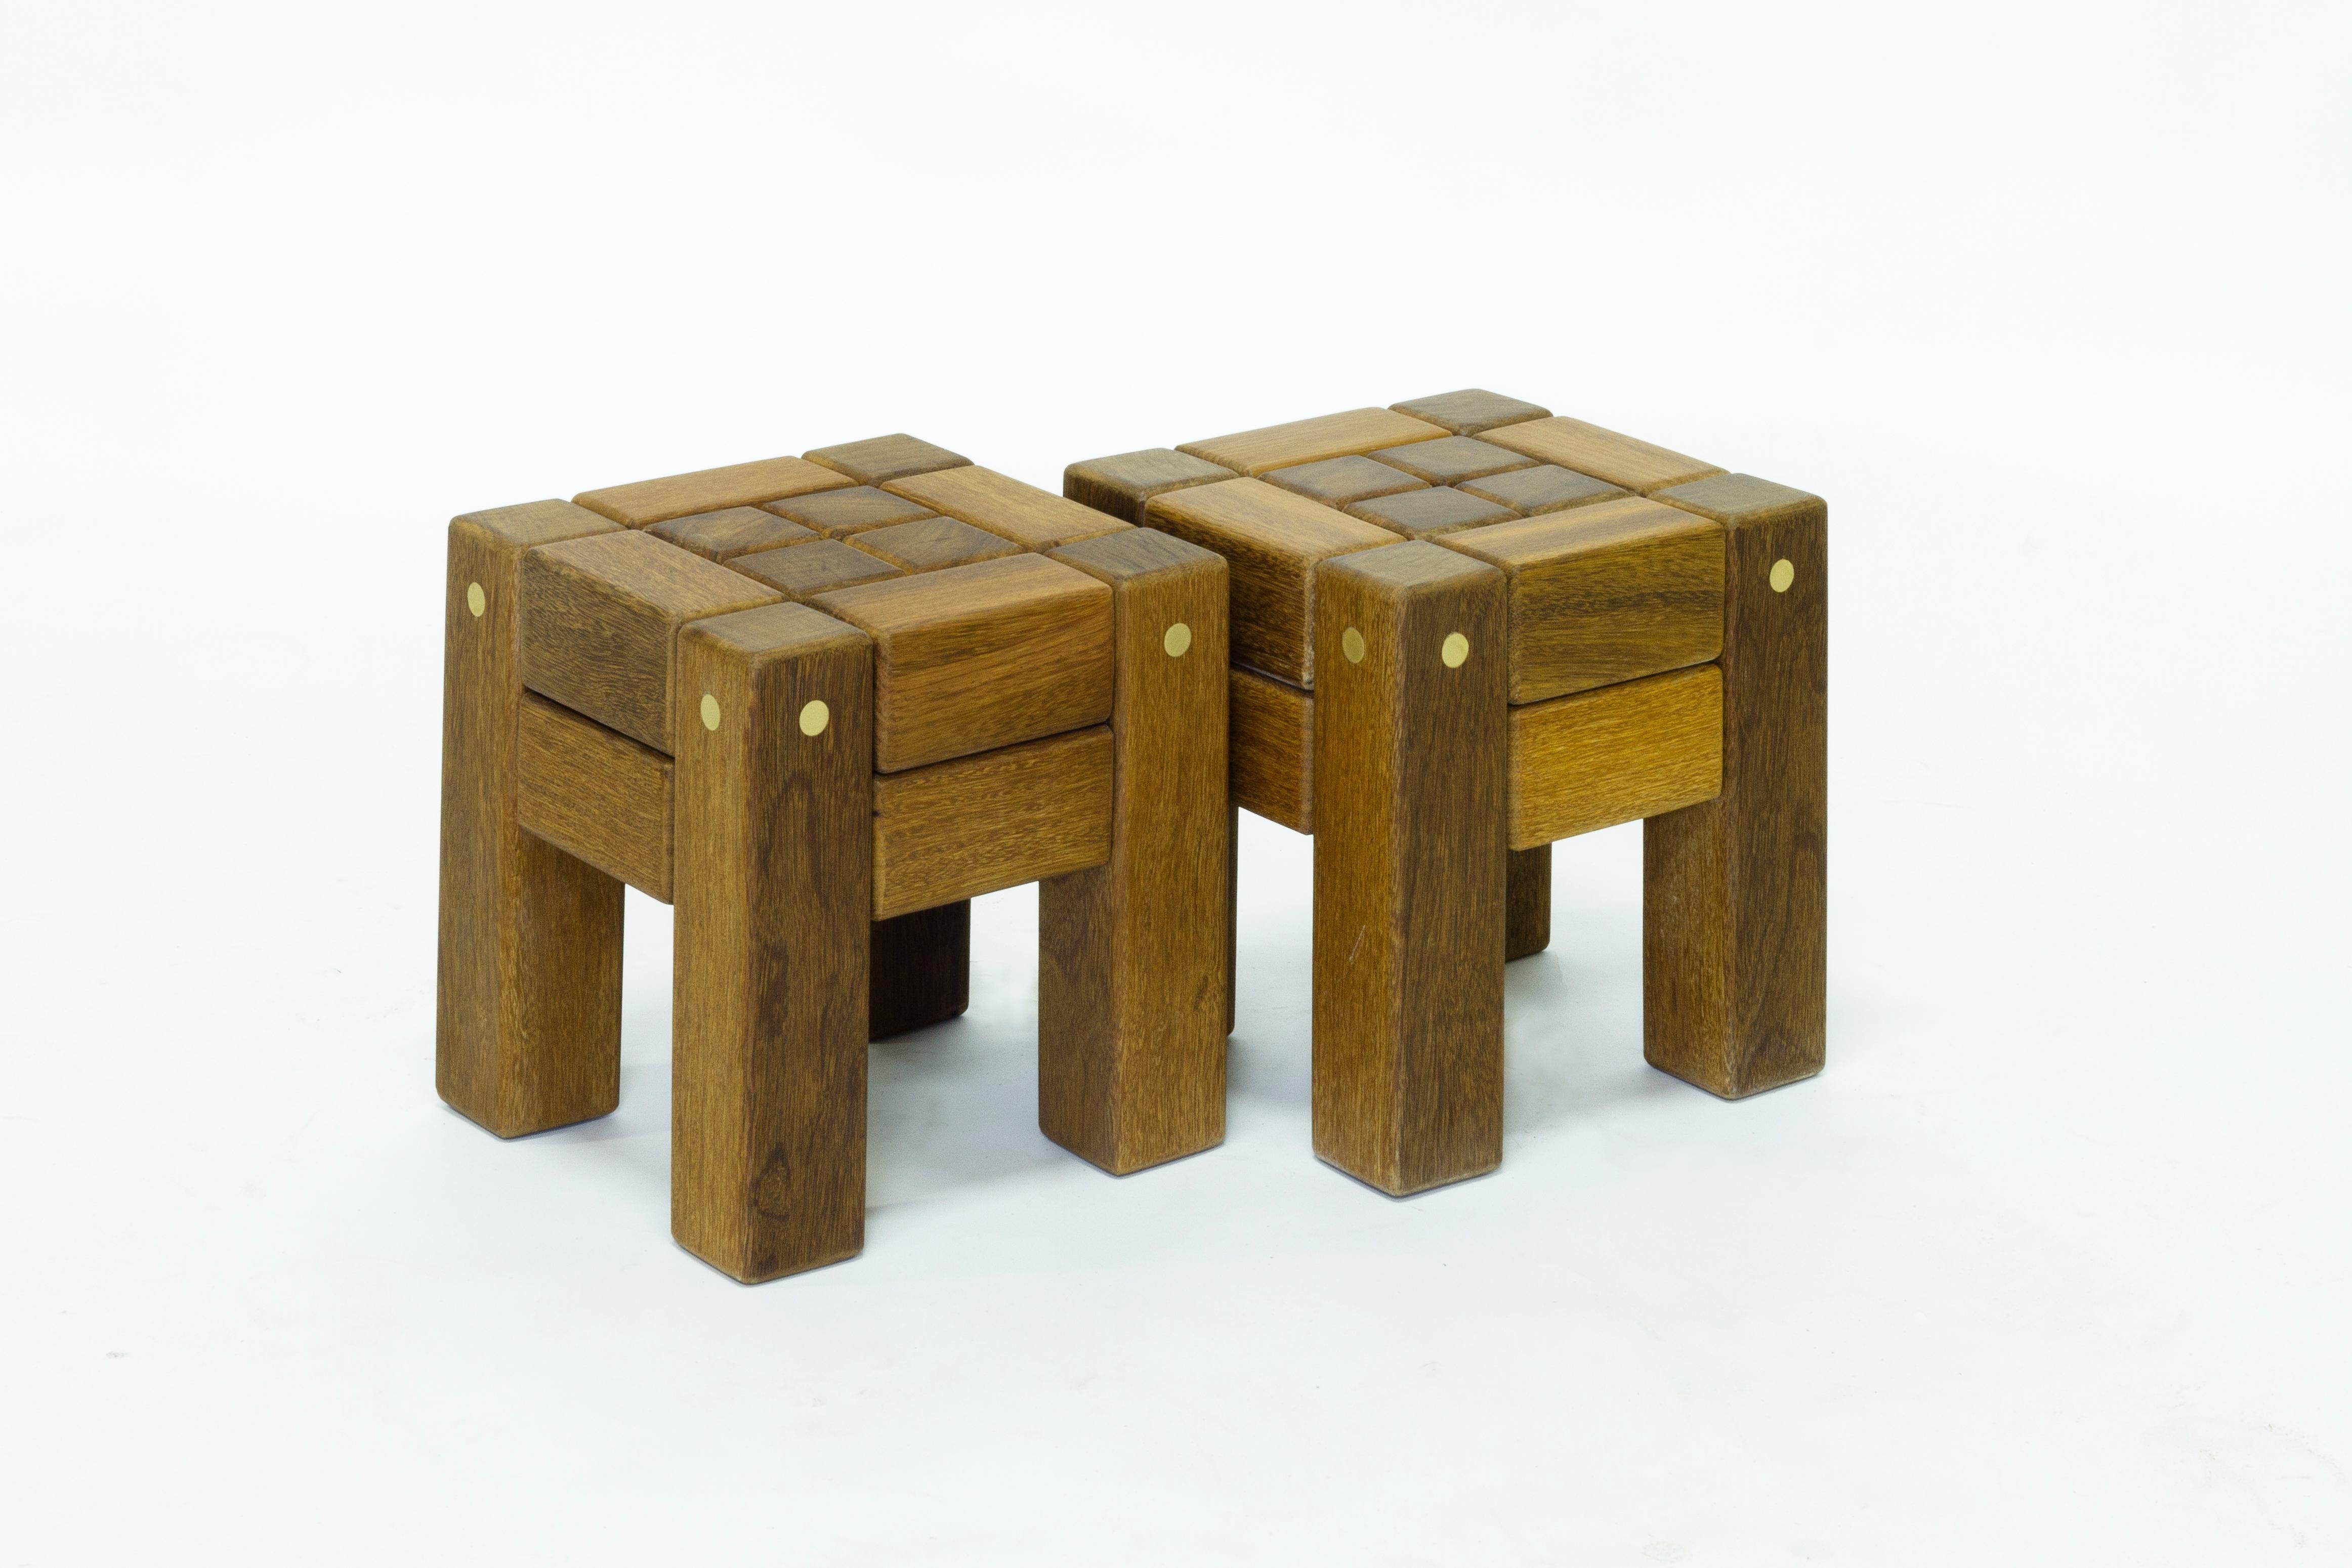 Woodwork Stool in Hardwood and Brass. Brazilian Contemporary Design by O Formigueiro. For Sale